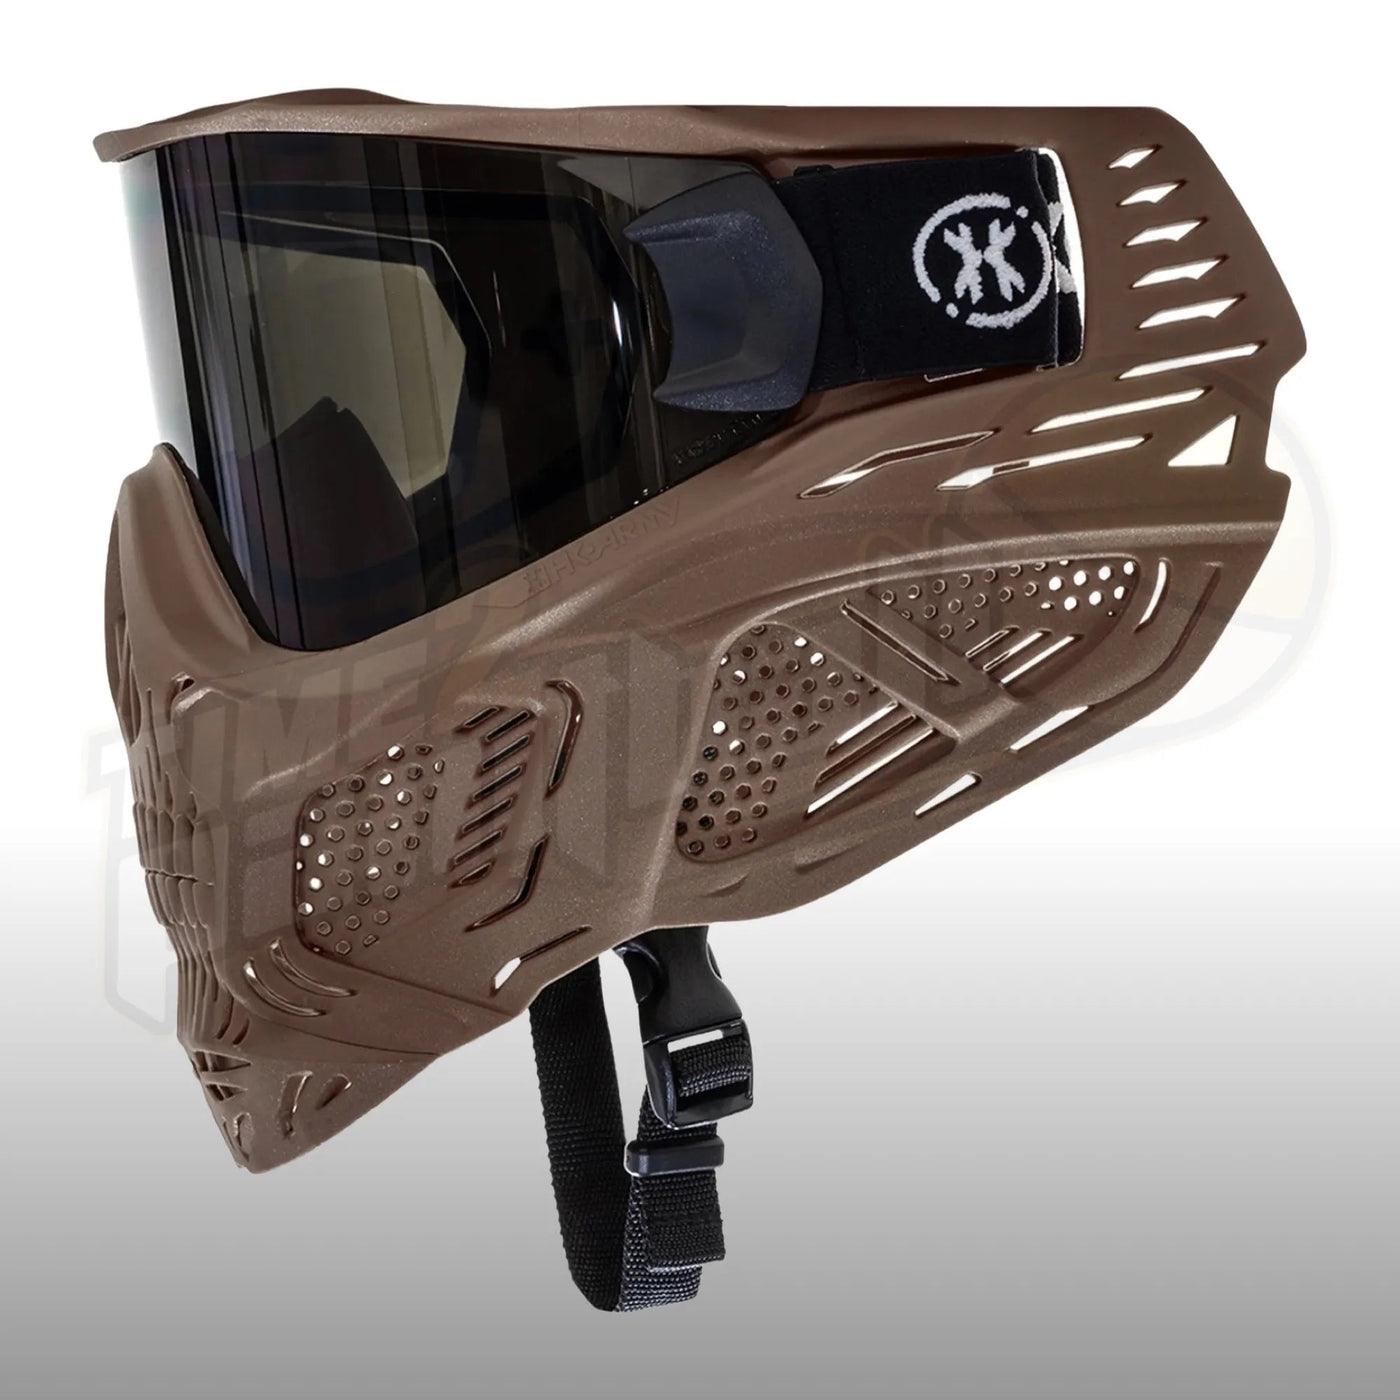 HK Army HSTL Skull Goggle Grave Digger Tan w/ Smoke Lens - Time 2 Paintball